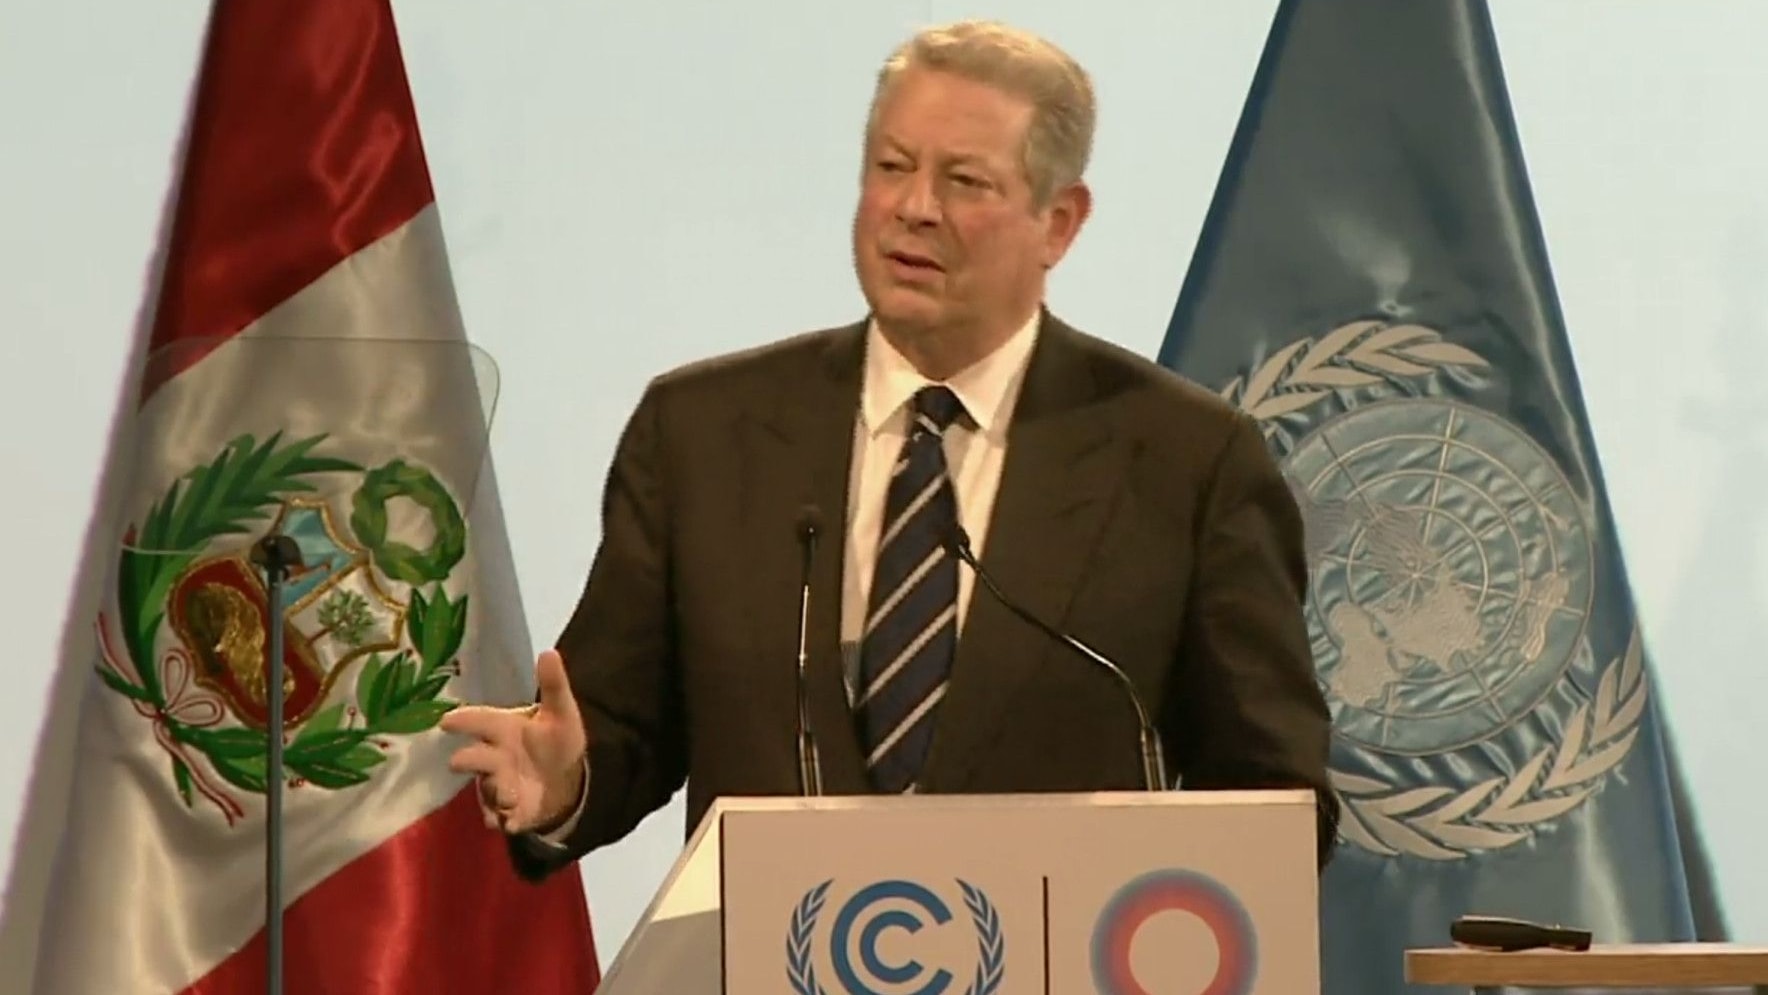 Al Gore at United Nations conference